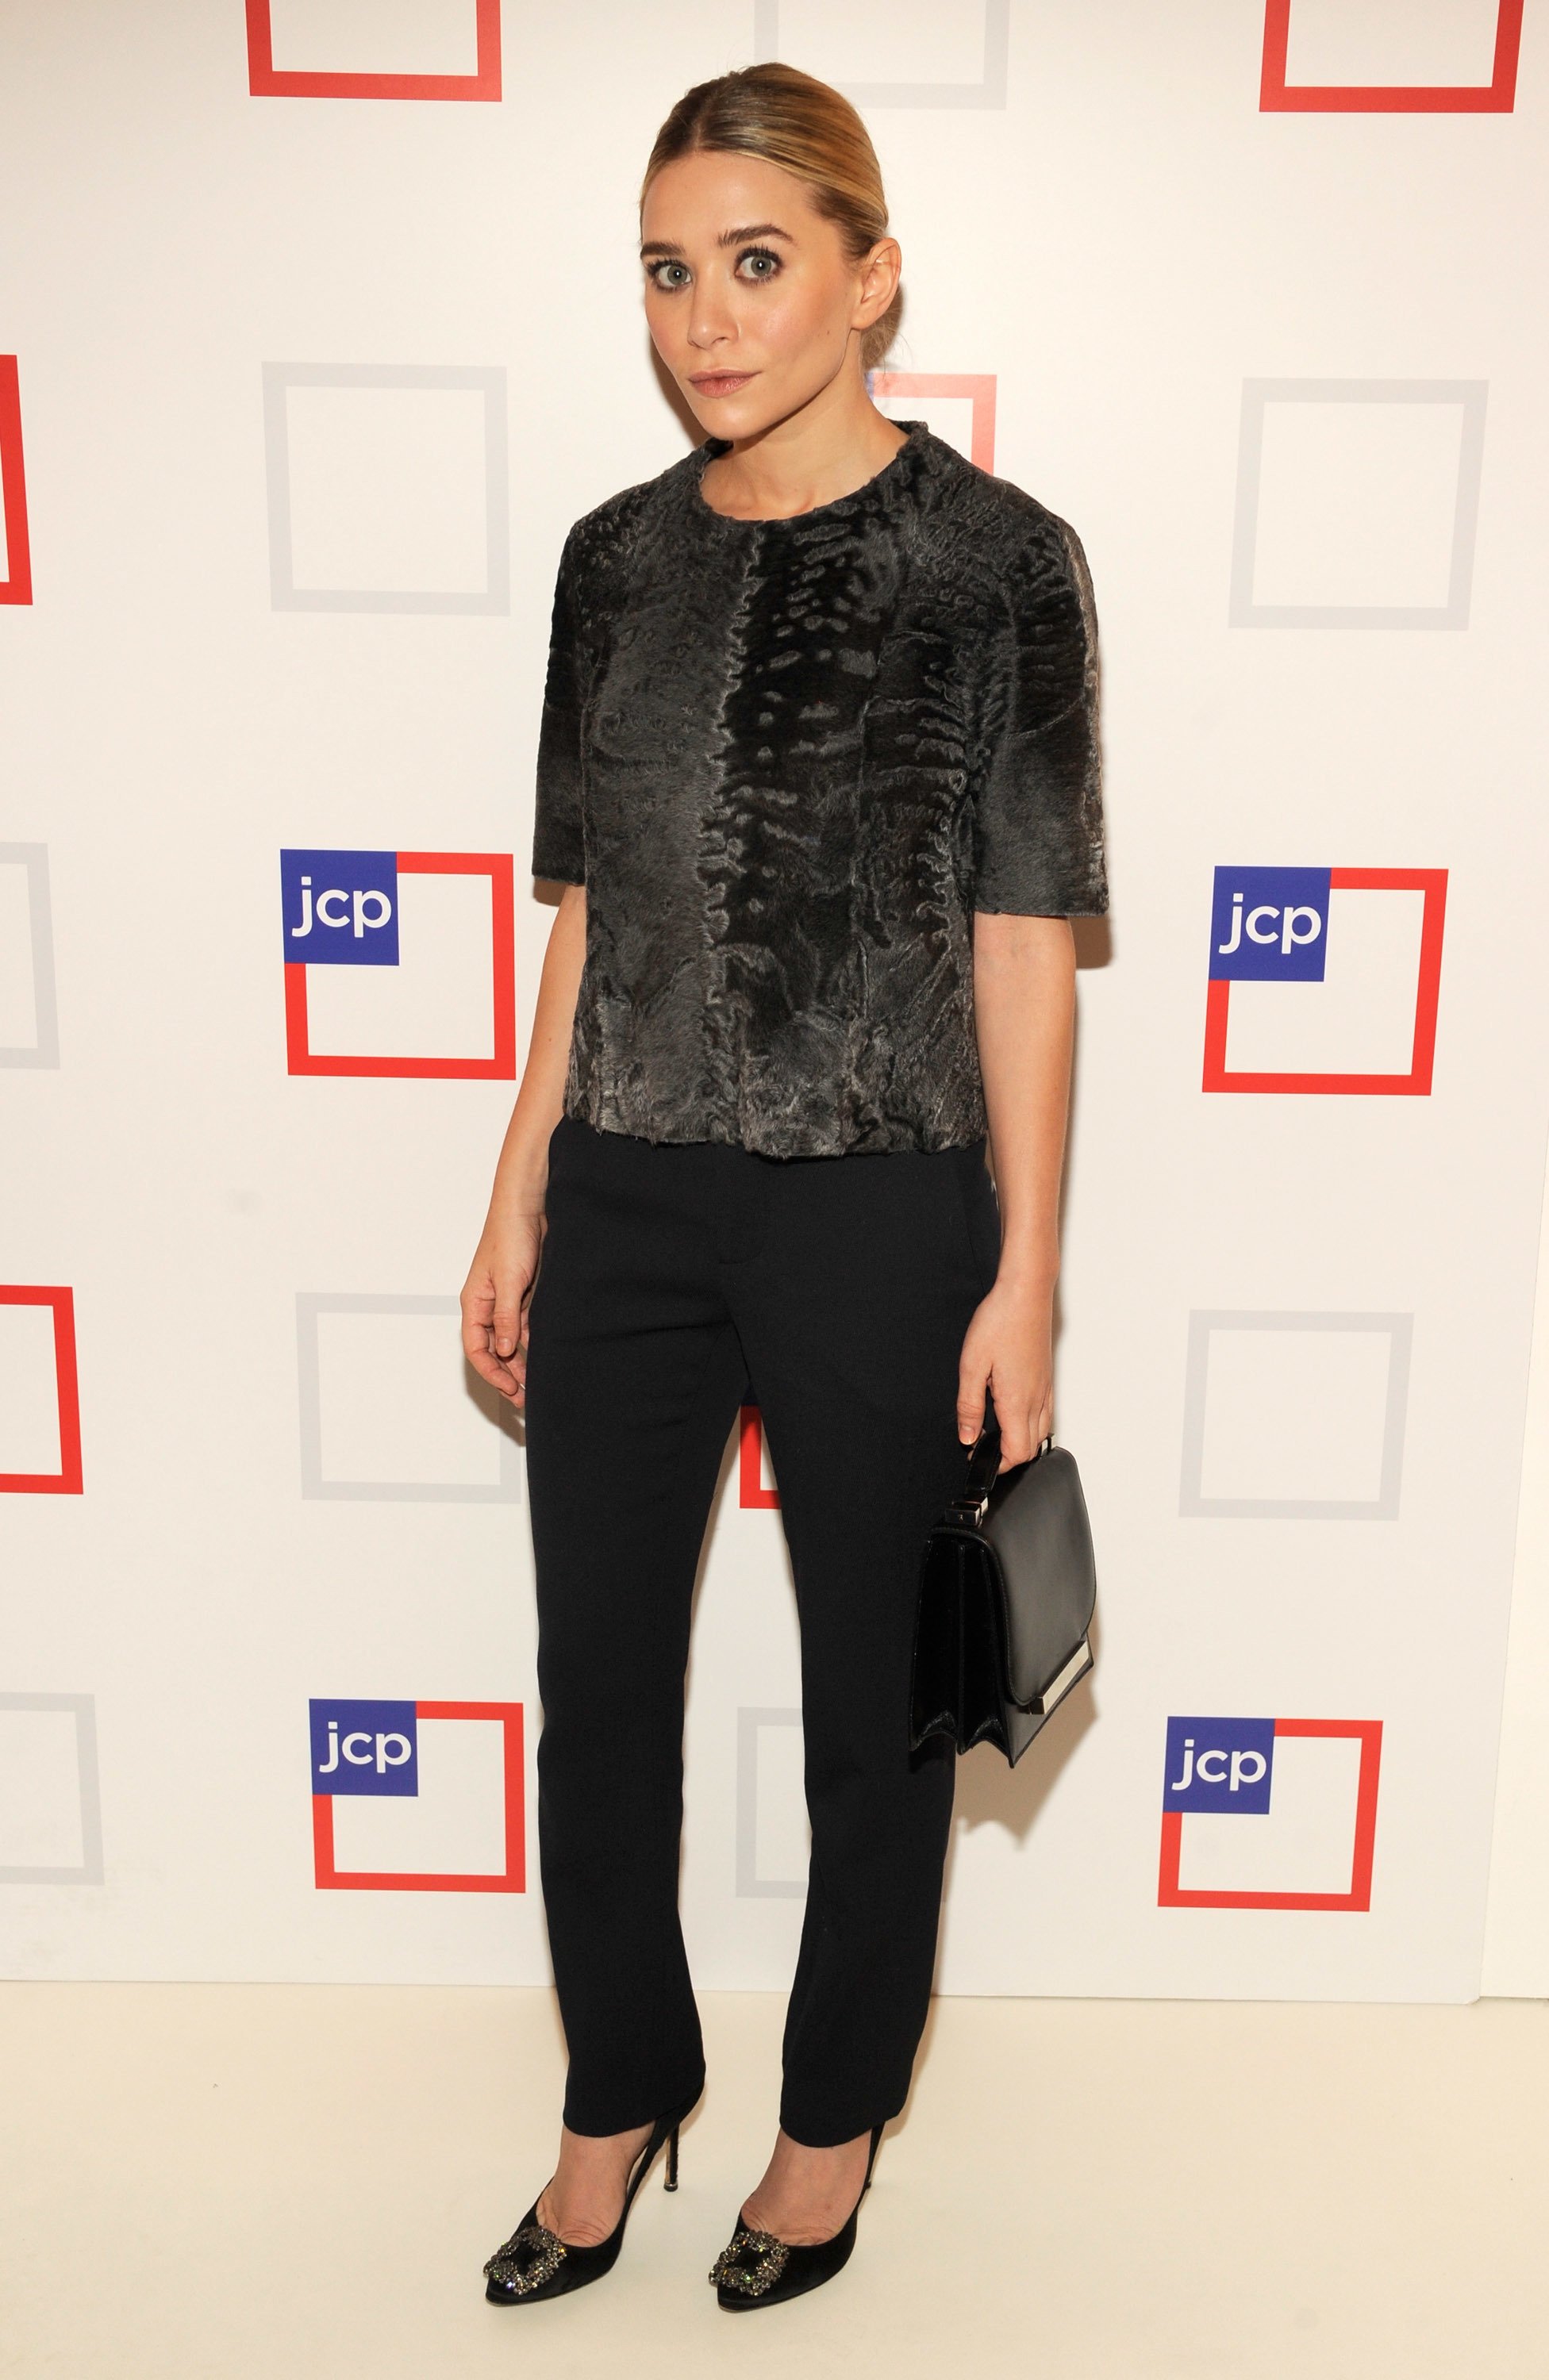 Ashley Olsen attends the jcpenney launch event at Pier 57 on January 25, 2012 in New York City. | Source: Getty Images